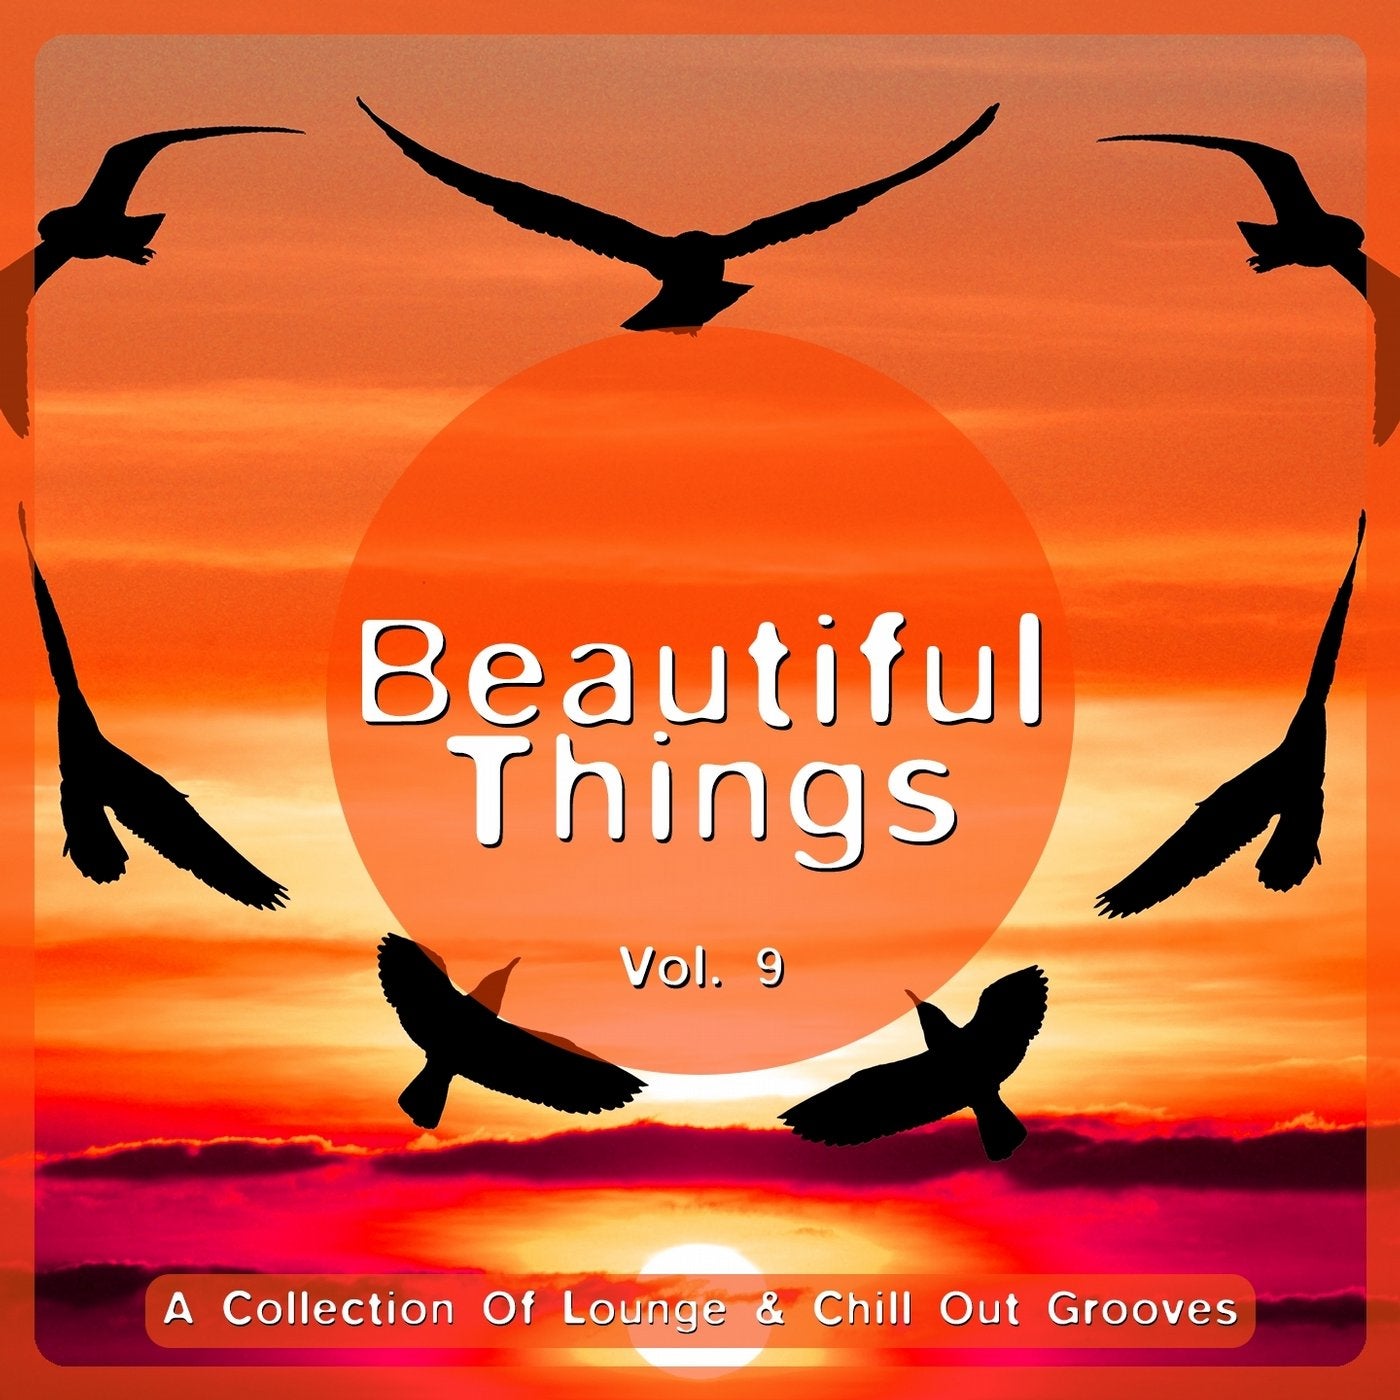 Beautiful Things, Vol. 9 (A Collection of Lounge & Chill out Grooves)